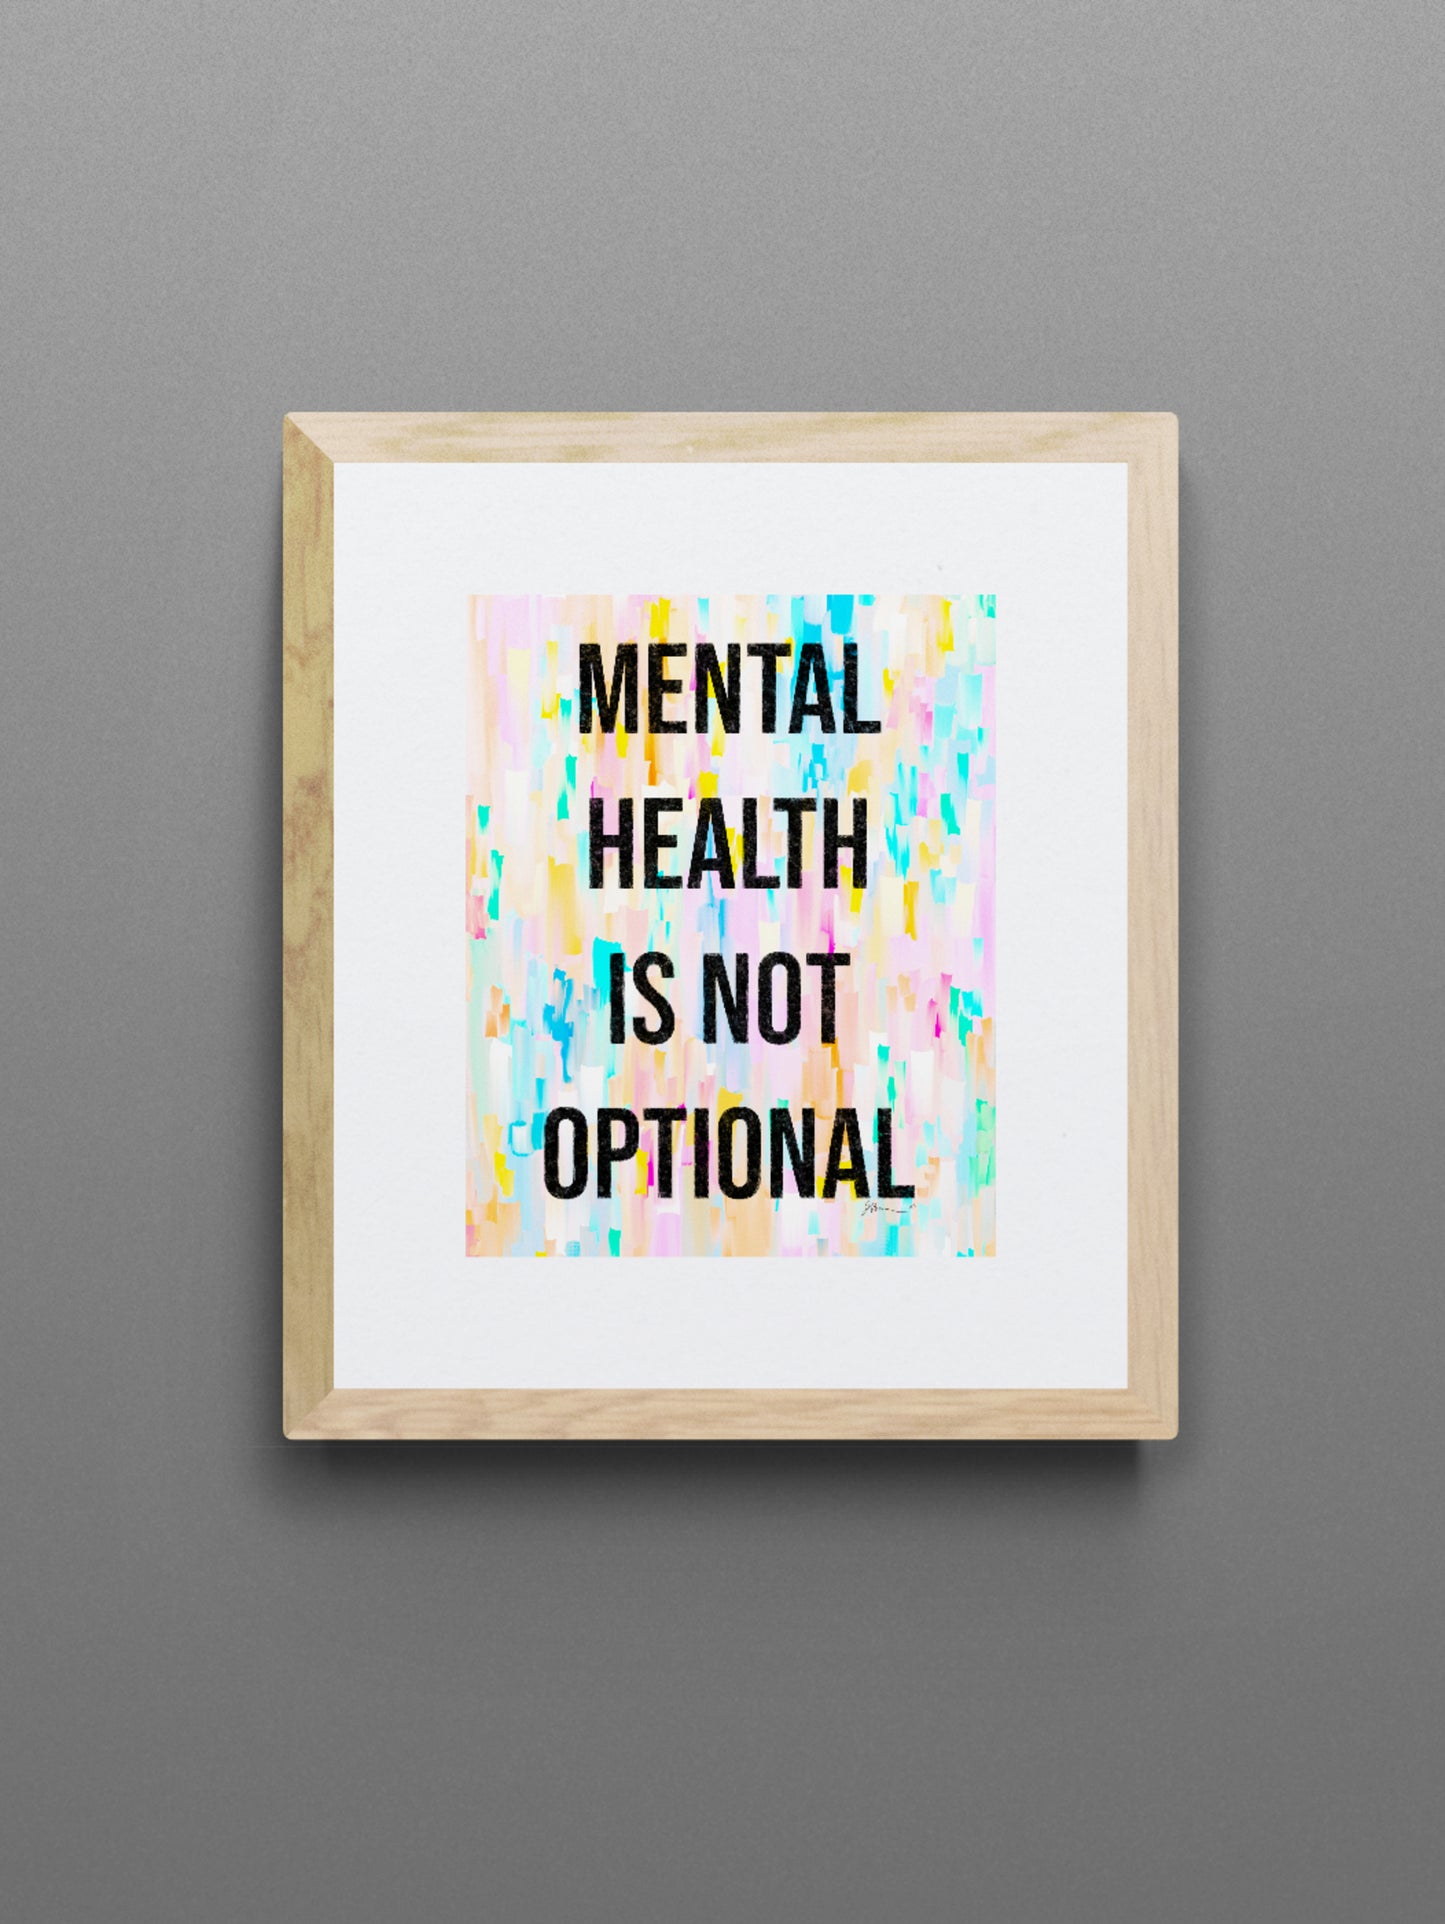 Mental Health Is Not Optional Inspirational Giclée Print 8” x 10” with Colorful Abstract Background